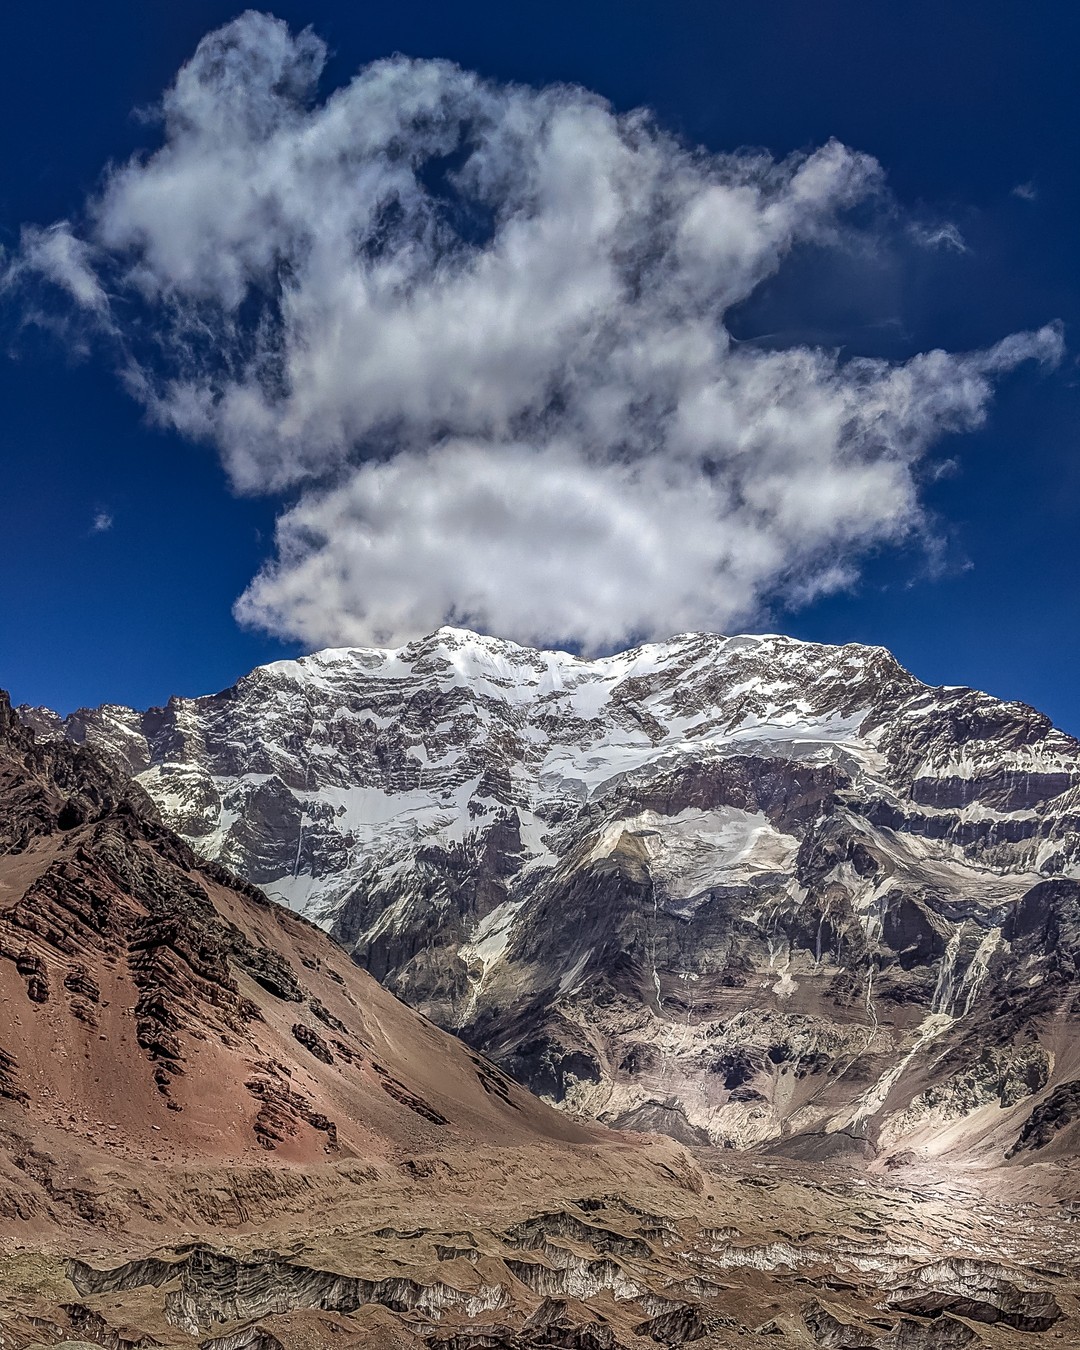 It was an intense two weeks of trekking and climbing, but on 19th January 2020, our @aconcaguaexpeditions team reached the summit of Aconcagua at 6,961m (22,837ft). ⁣
⁣
Aconcagua is the highest mountain I've climbed. It is the second-highest summit of the seven summits after only Everest and was my third mountain of the seven summits (fourth if you include Kosciuszko in Australia – which I don't!) ⁣
⁣
It is the highest mountain in the Americas, the Western and Southern Hemispheres and outside of Asia.⁣
⁣
It has been ten years in the planning, so a huge thank you to @aconcaguaexpeditions and all my sponsors who have made my dream come true! Roll on Denali! 😉⁣
⁣
@blackdiamond ⁣
@salomon ⁣
@ospreyeurope ⁣
@powertraveller ⁣
@cotswoldoutdoor ⁣
@jackwolfskin ⁣
@smartwool_europe ⁣
@haglofs ⁣
@bloceyewear ⁣
@1000milesocks⁣
⁣
#aconcagua2020 #argentina #argentina🇦🇷 #VisitArgentina  #sevensummits  #7summits #7summitschallenge #trekaconcagua #climbaconcagua #aconcaguaargentina #trekkingaconcagua #aconcaguatrekking #aconcaguaclimb #parqueprovincialaconcagua #trekkingargentina #andesmountains #andes